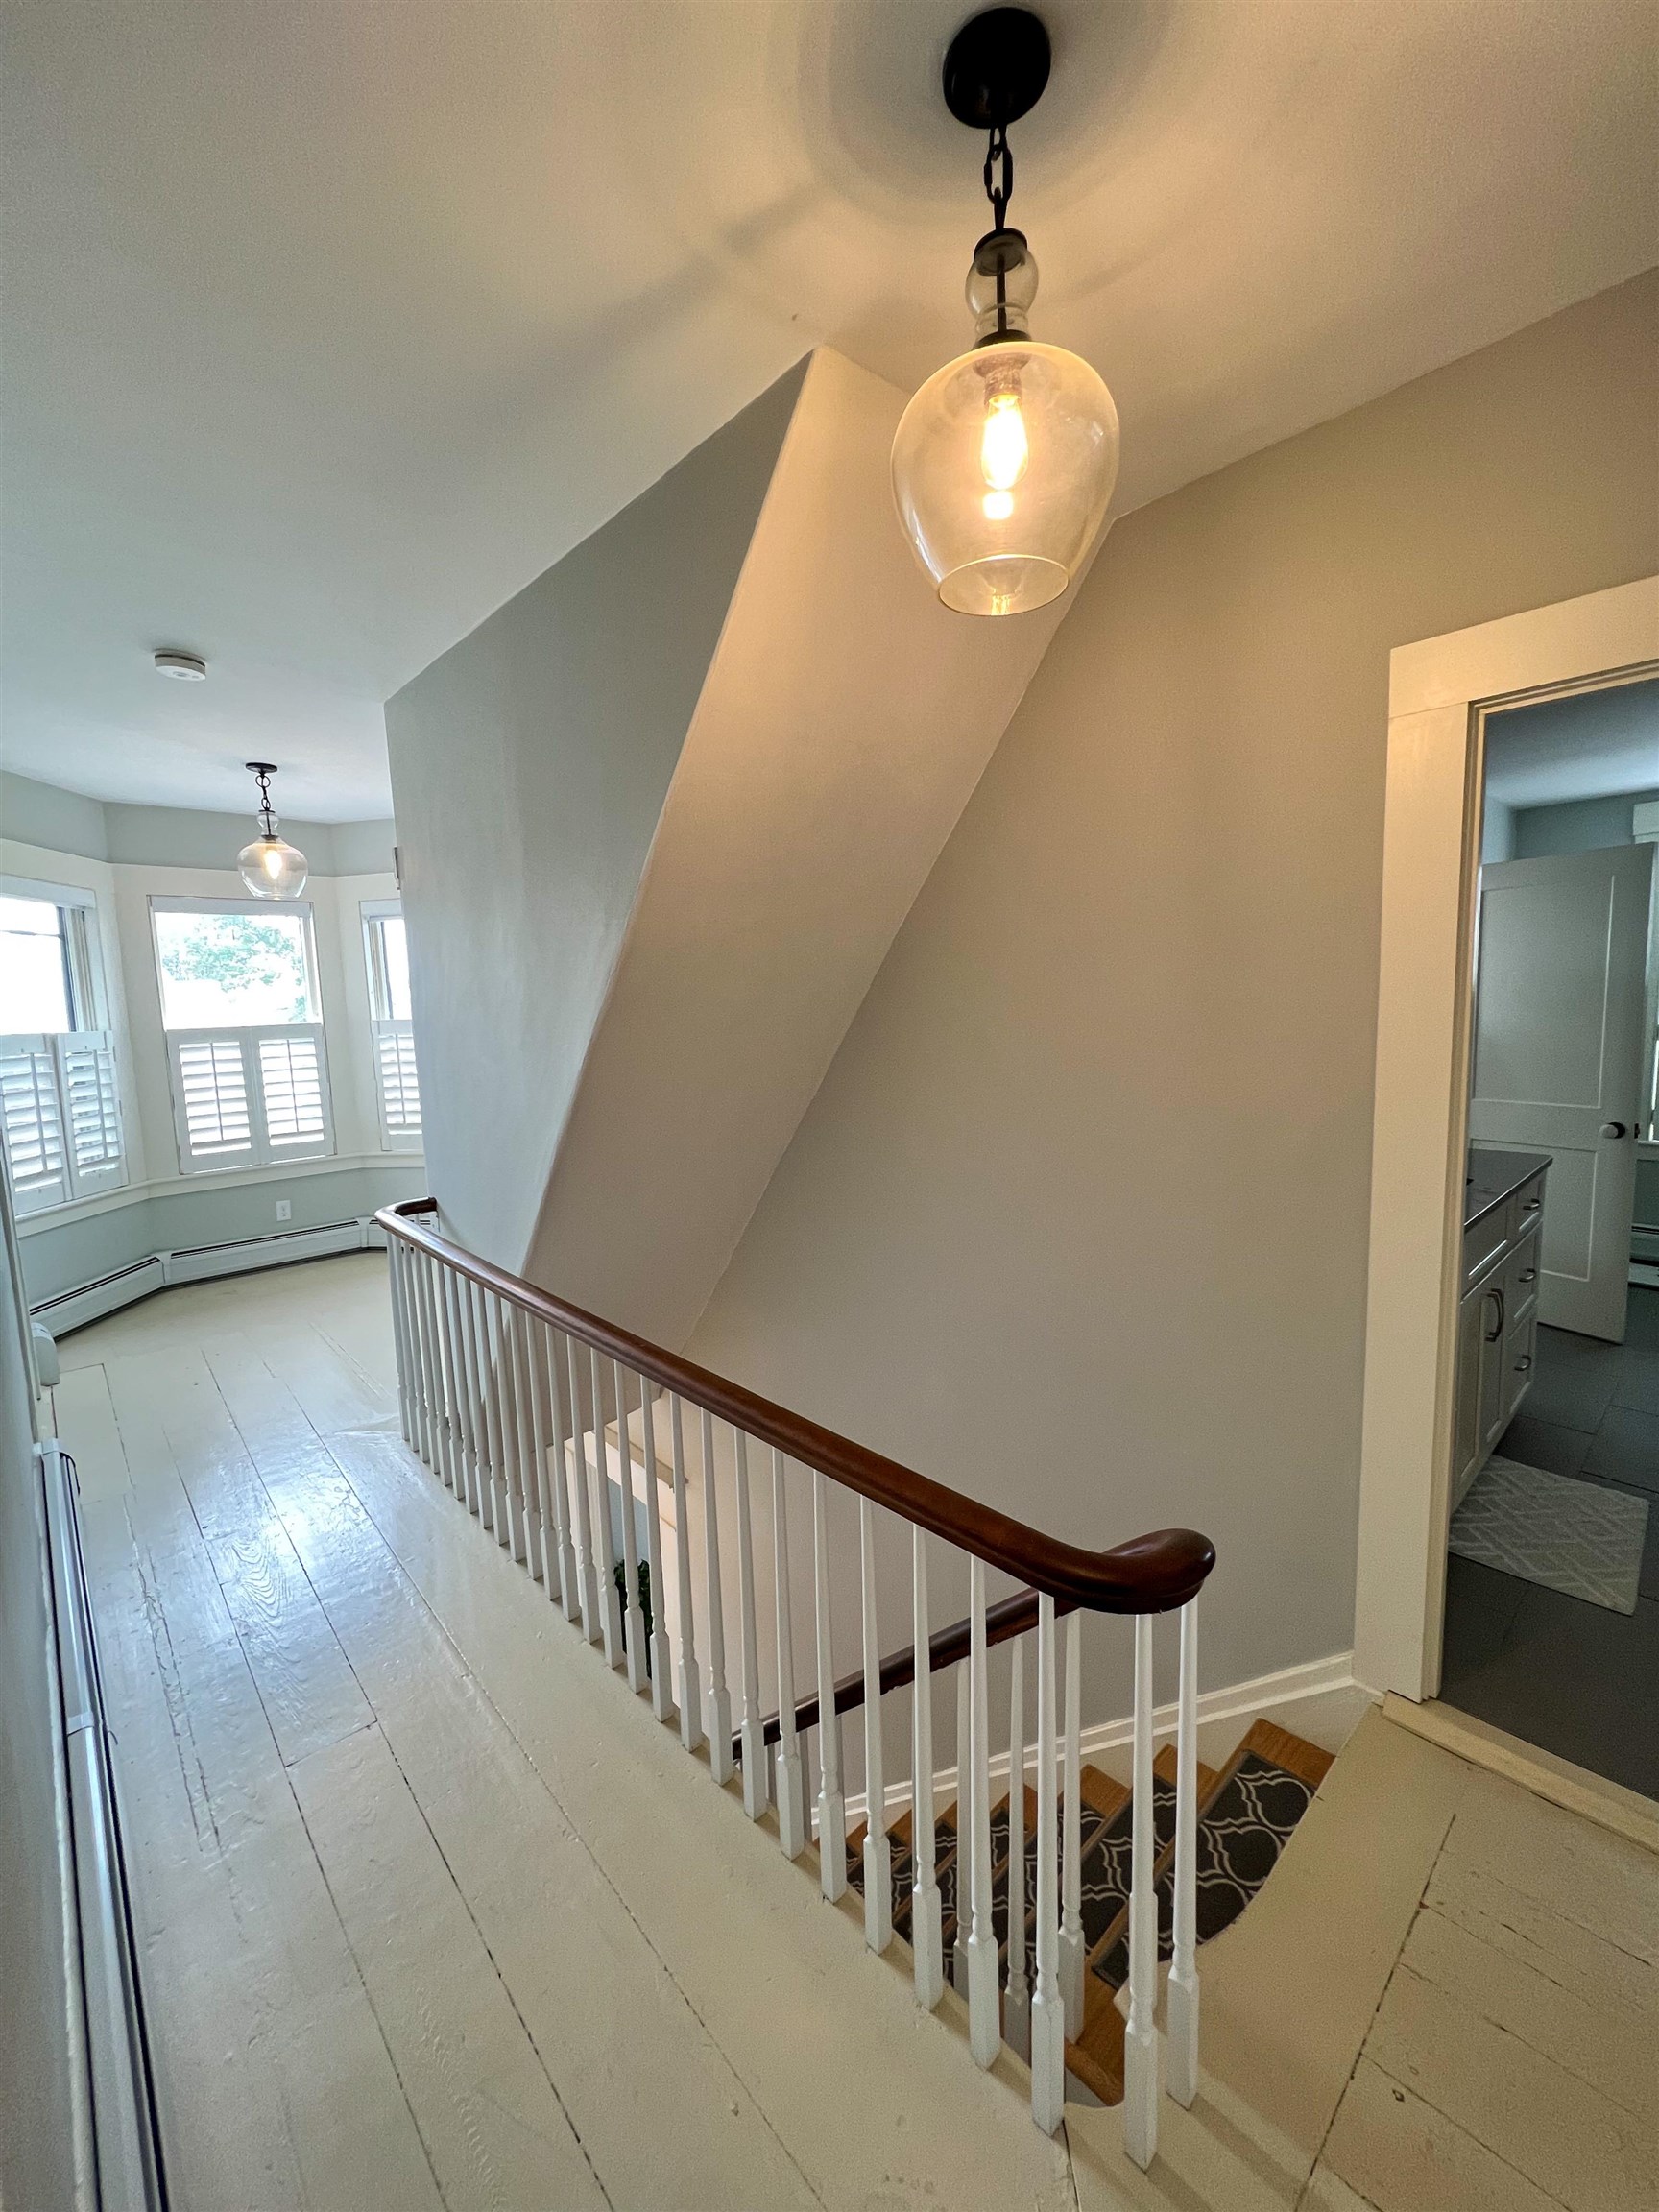 This elegant home also features modern light fixtures and neutral paint colors throughout